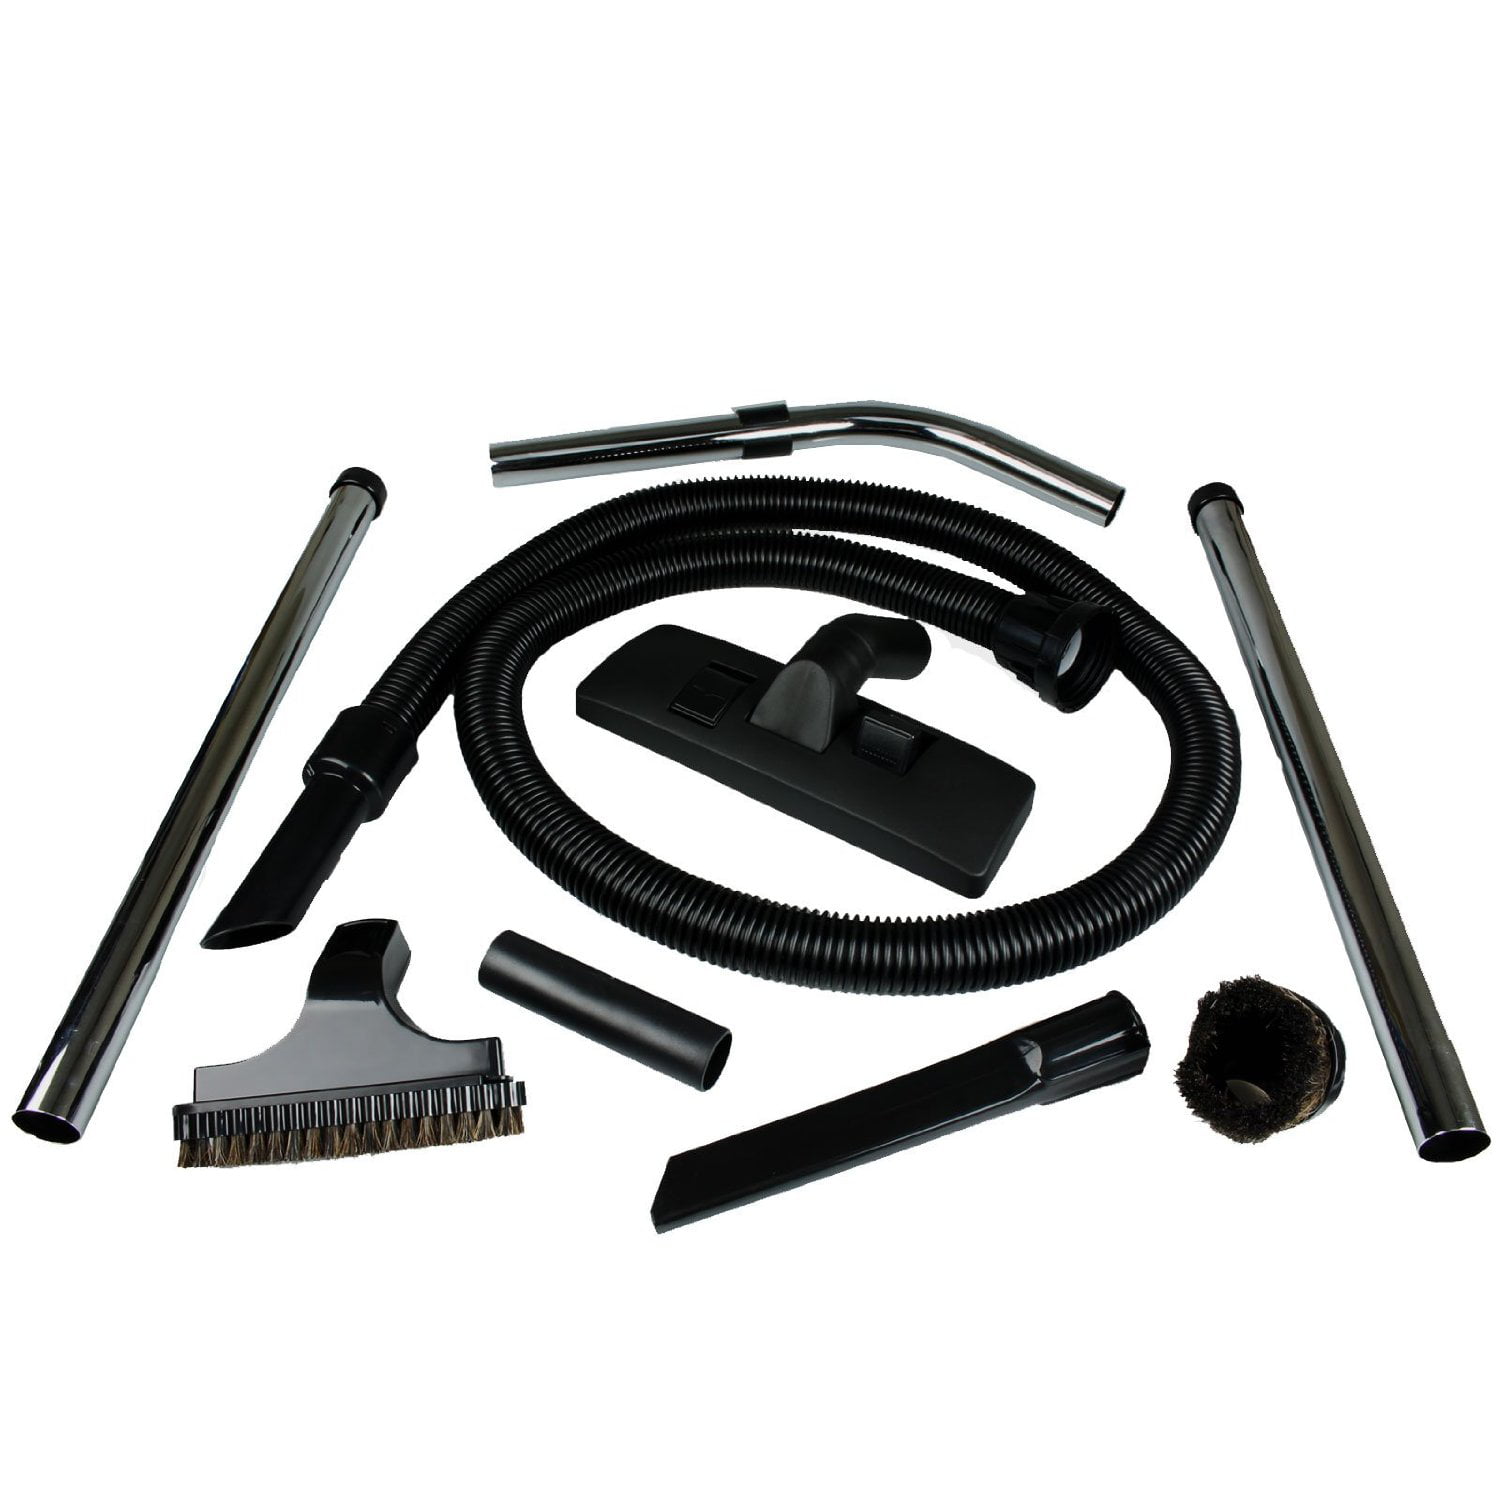 Henry etc Complete 1.8m Vacuum Cleaner Tool Accessories Kit for Numatic Hoovers 